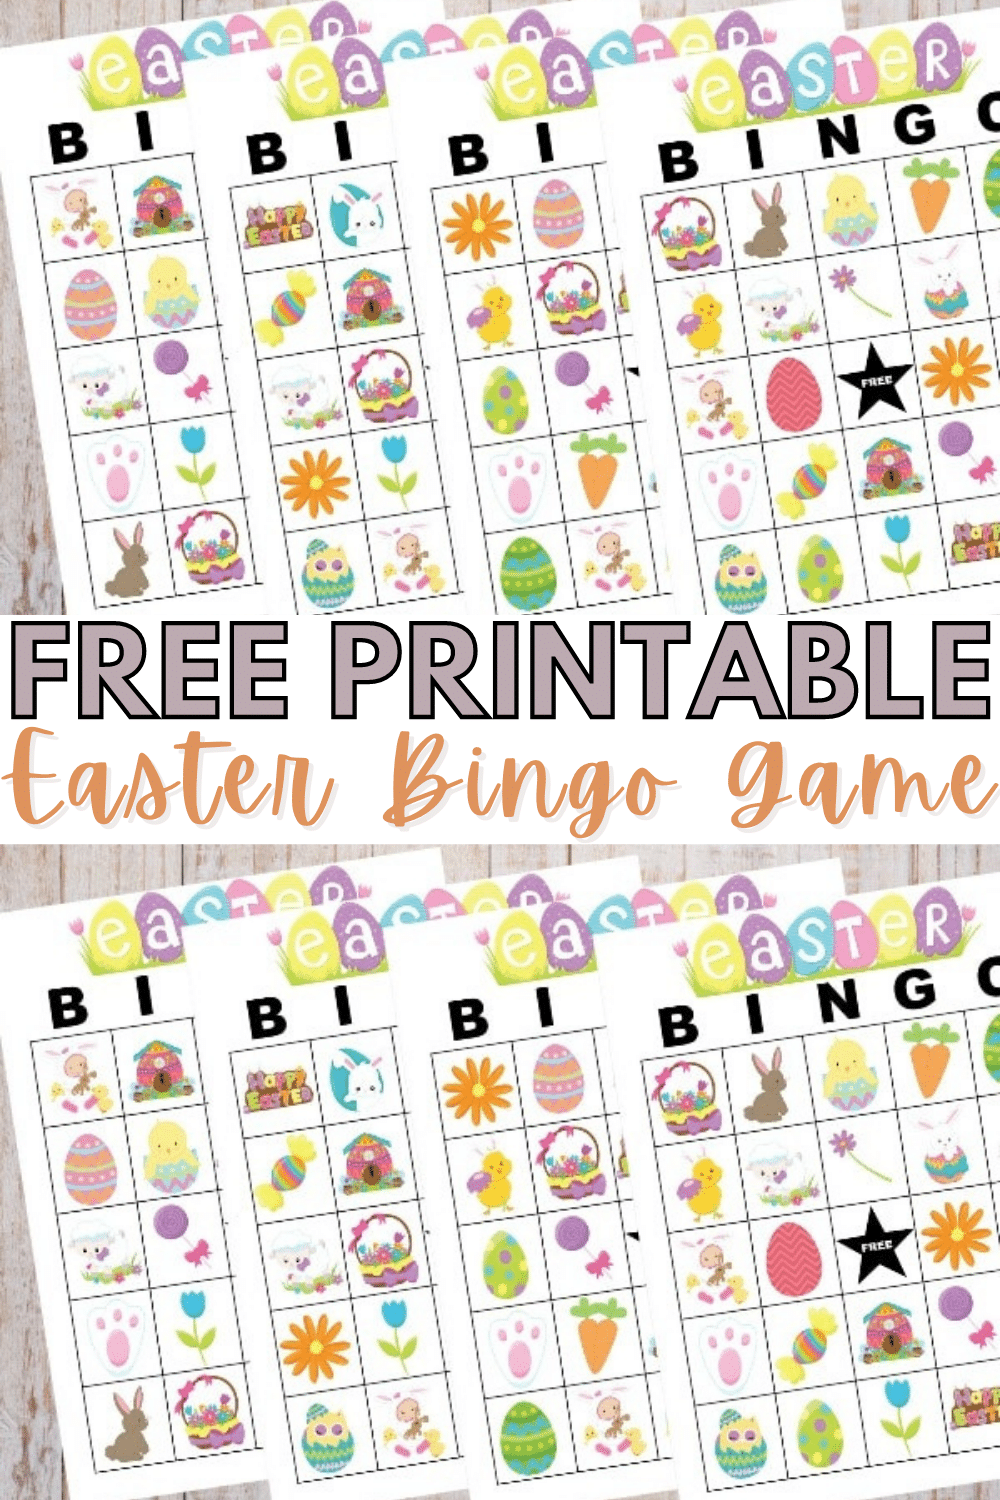 Easter Bingo is a fun game to play during spring. These free printable Easter Bingo cards are colorful and perfect for kids. #printables #freeprintables #easter #bingo via @wondermomwannab